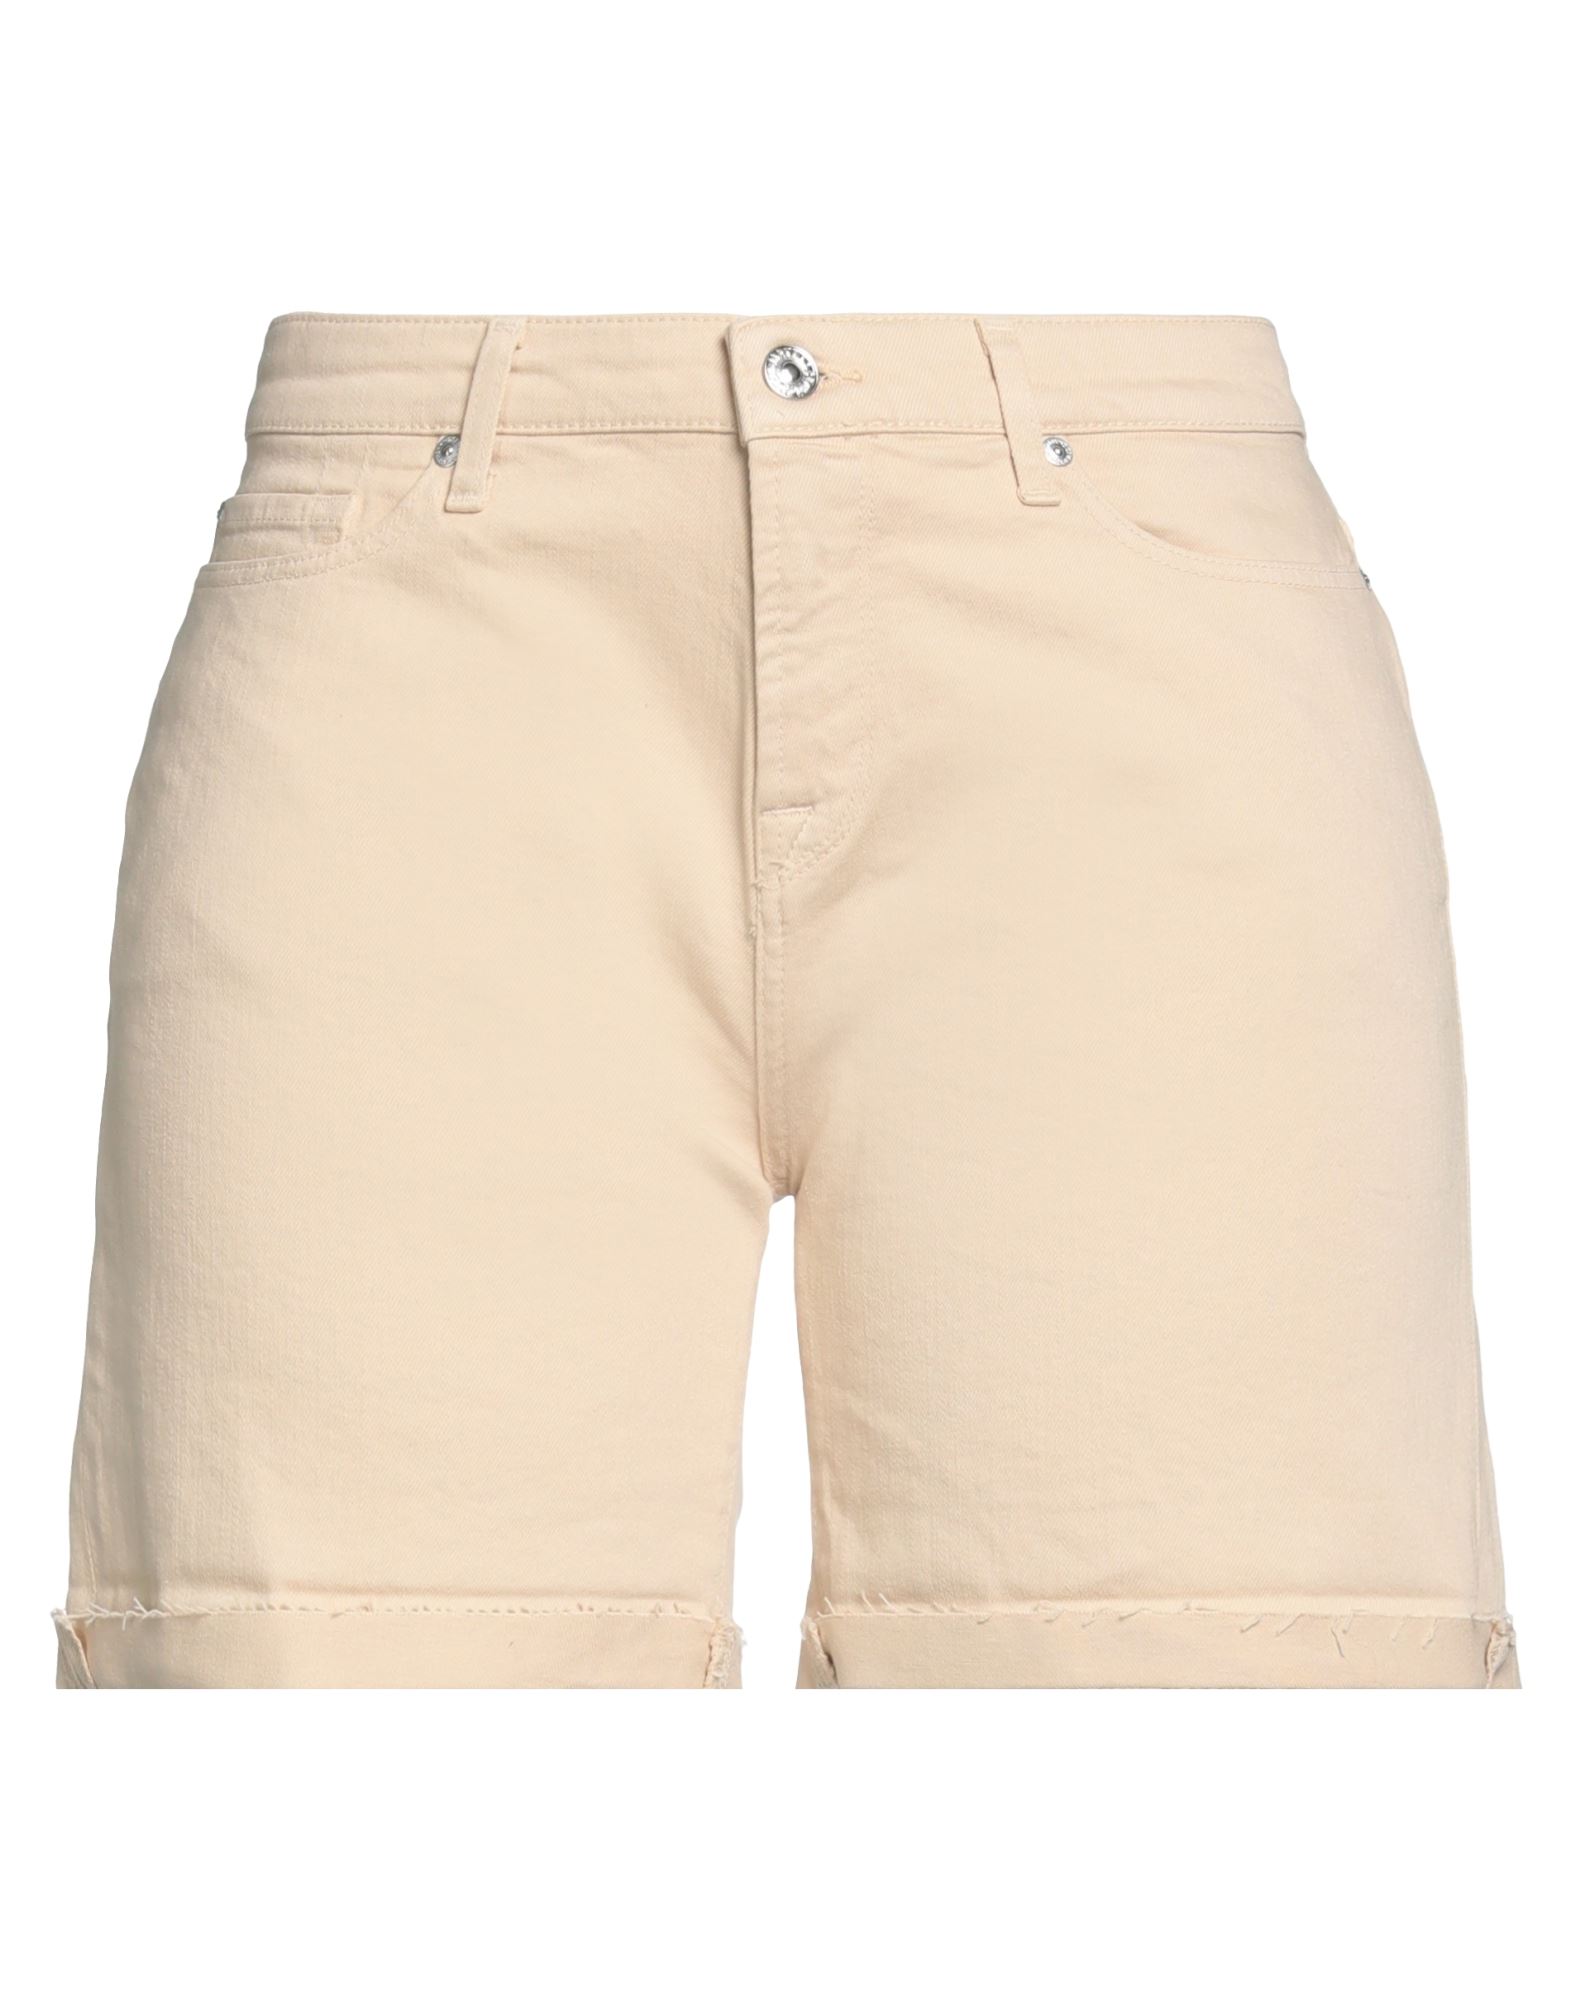 7 For All Mankind Denim Shorts In Beige